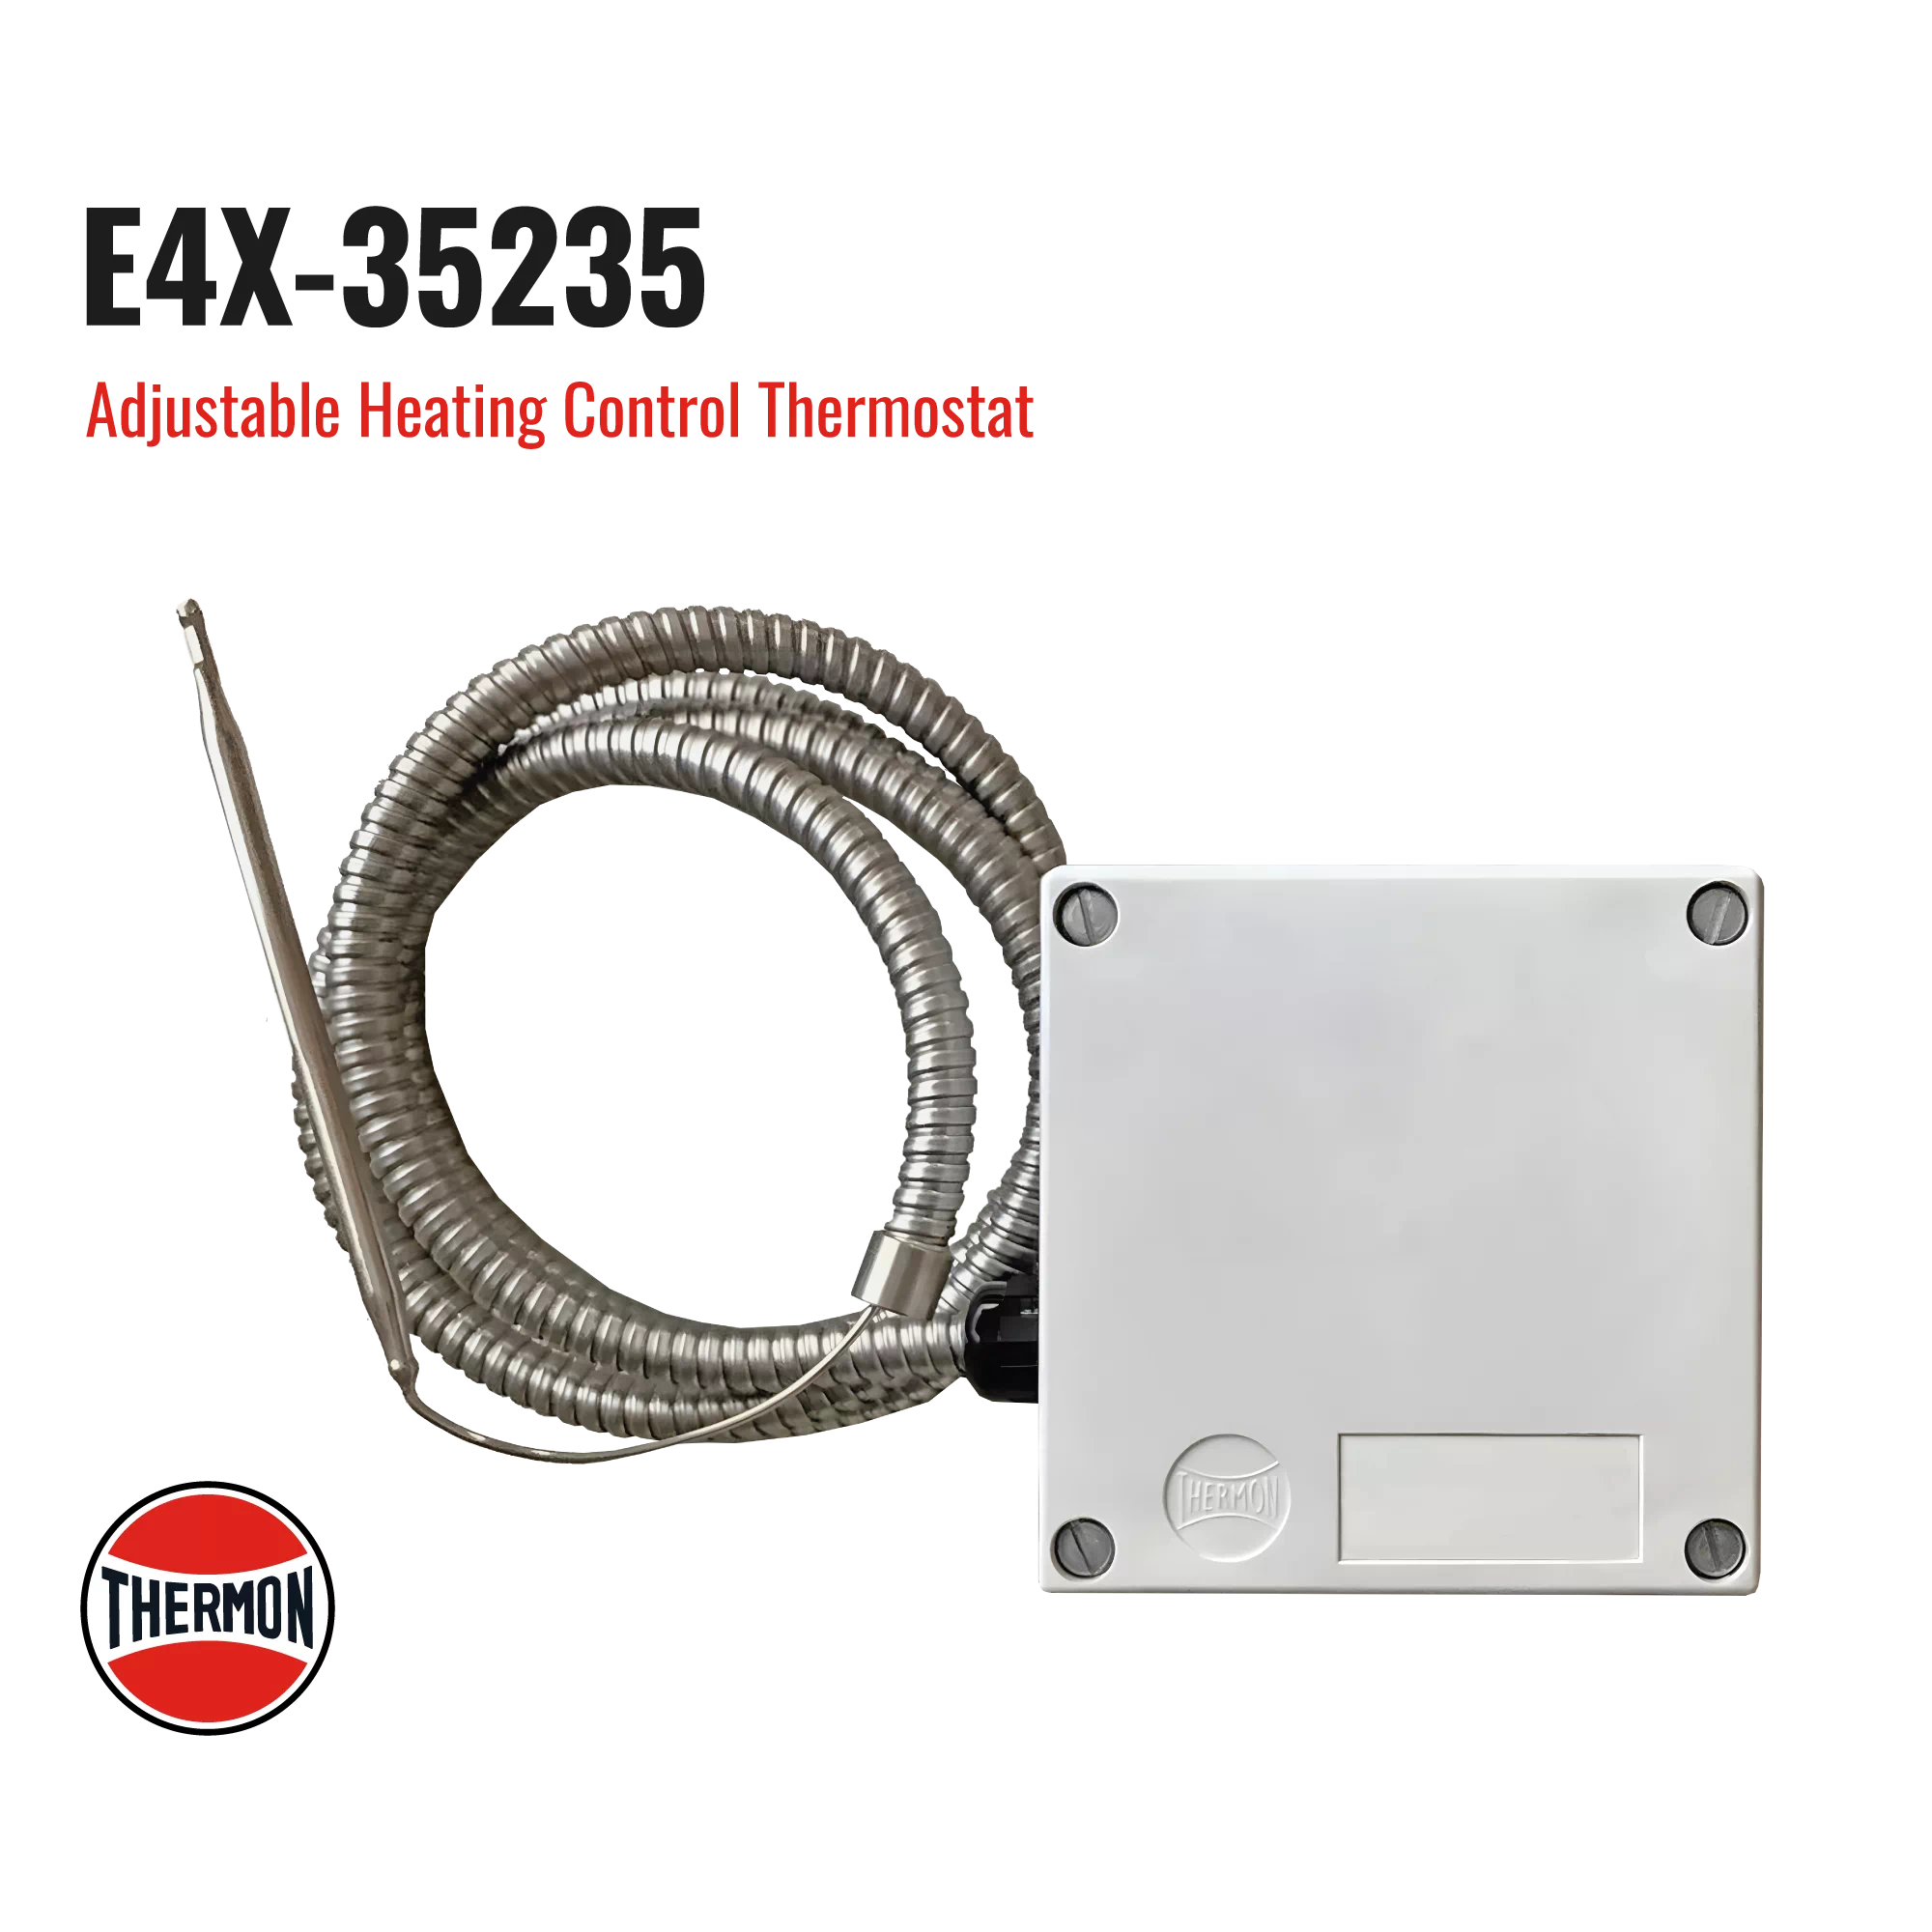 Thermon-E4X-35235-Industrial-Heating-Heat-Tracing-Systems